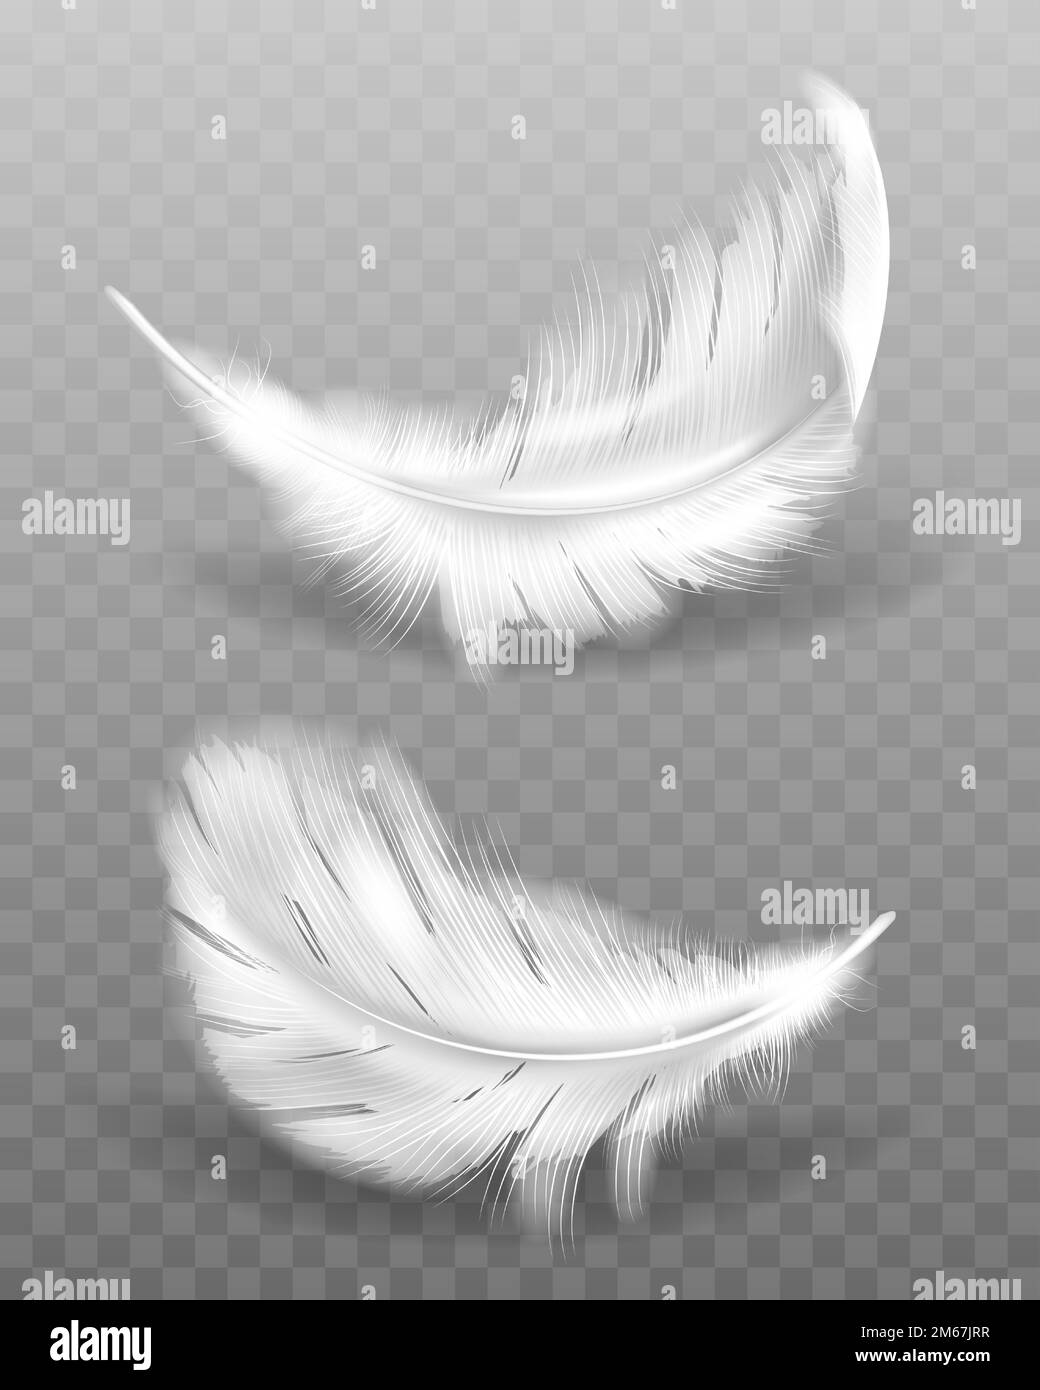 White fluffy feather with shadow vector realistic set isolated on transparent background. Feathers from wings of birds or angel, symbol of softness and purity, design element Stock Vector